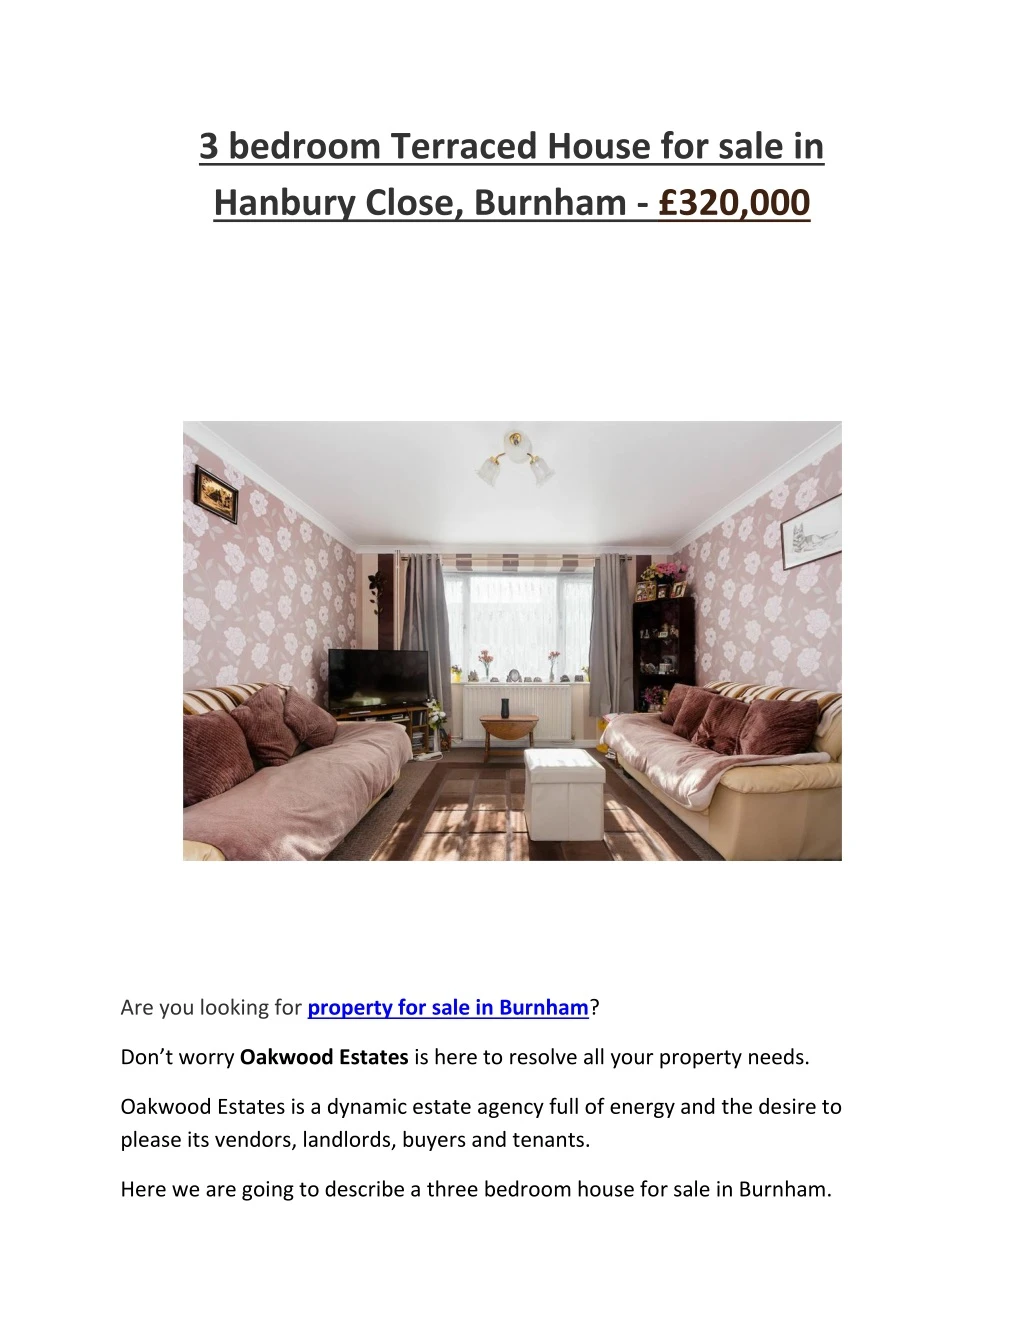 3 bedroom terraced house for sale in hanbury